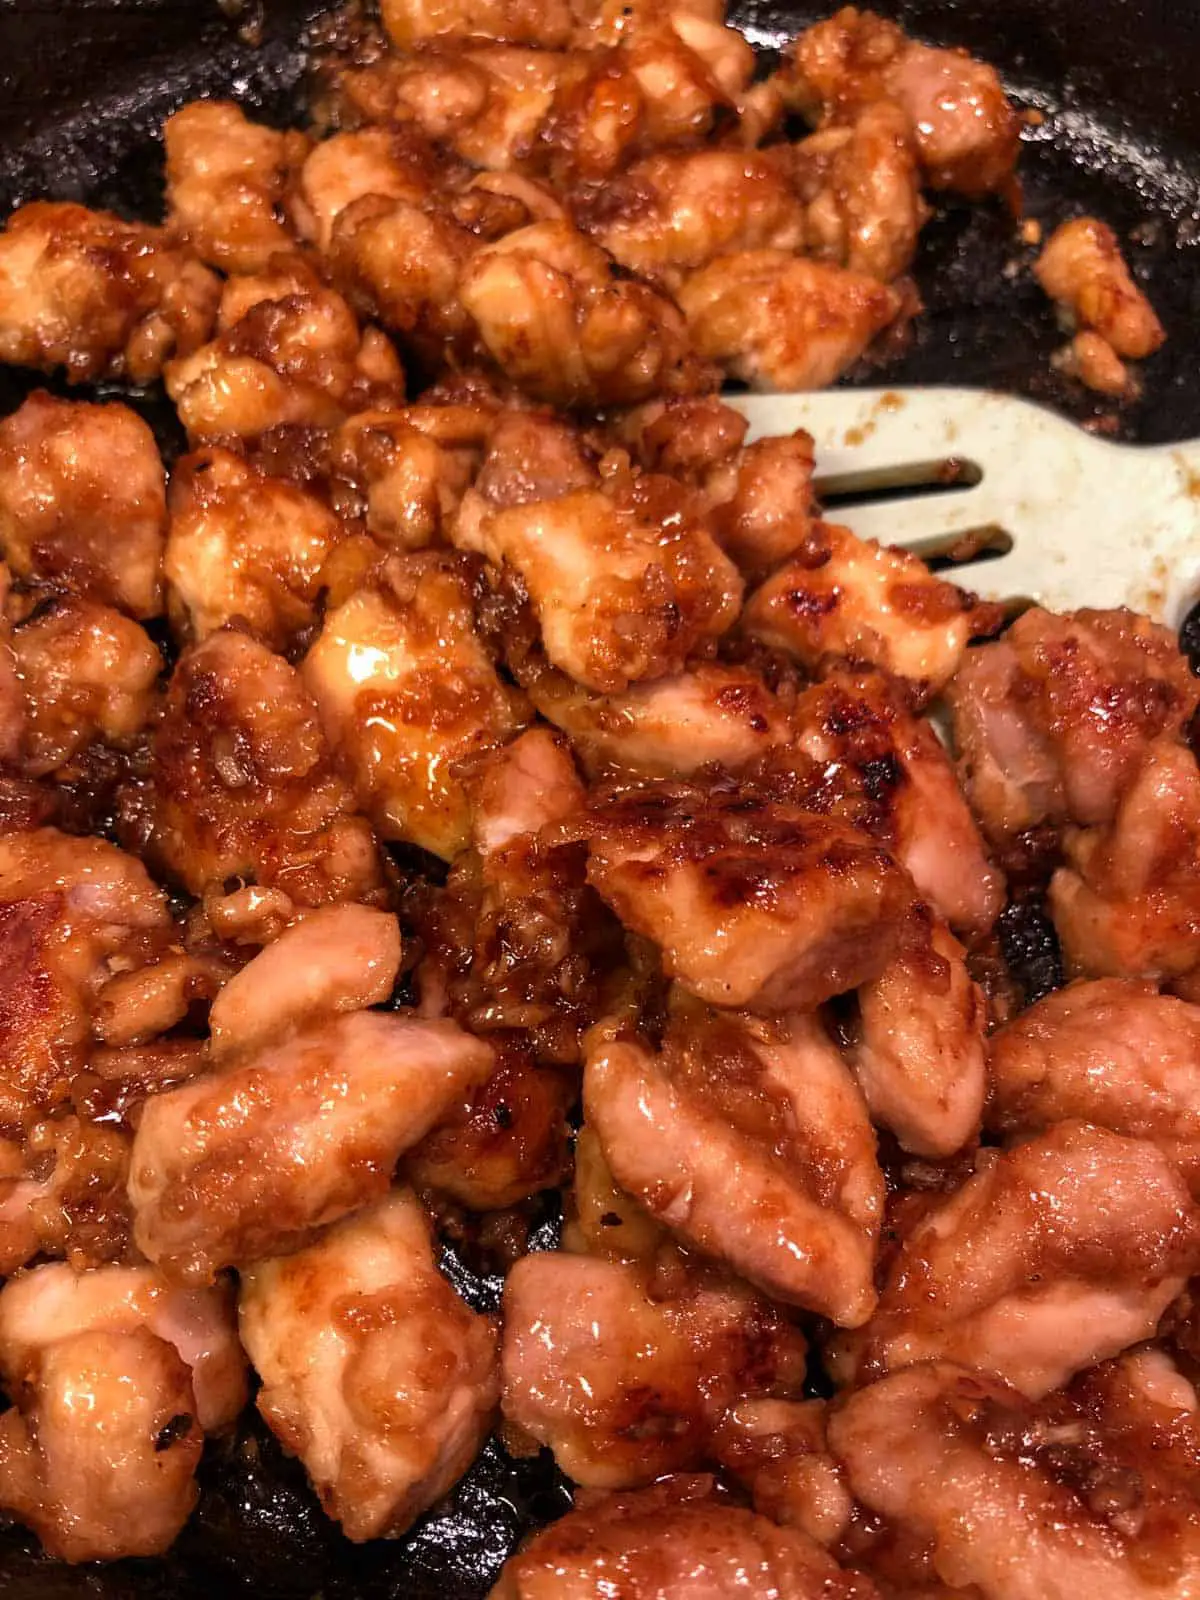 Chicken pieces coated with a sticky sauce in a cast iron pan with a blue utensil.